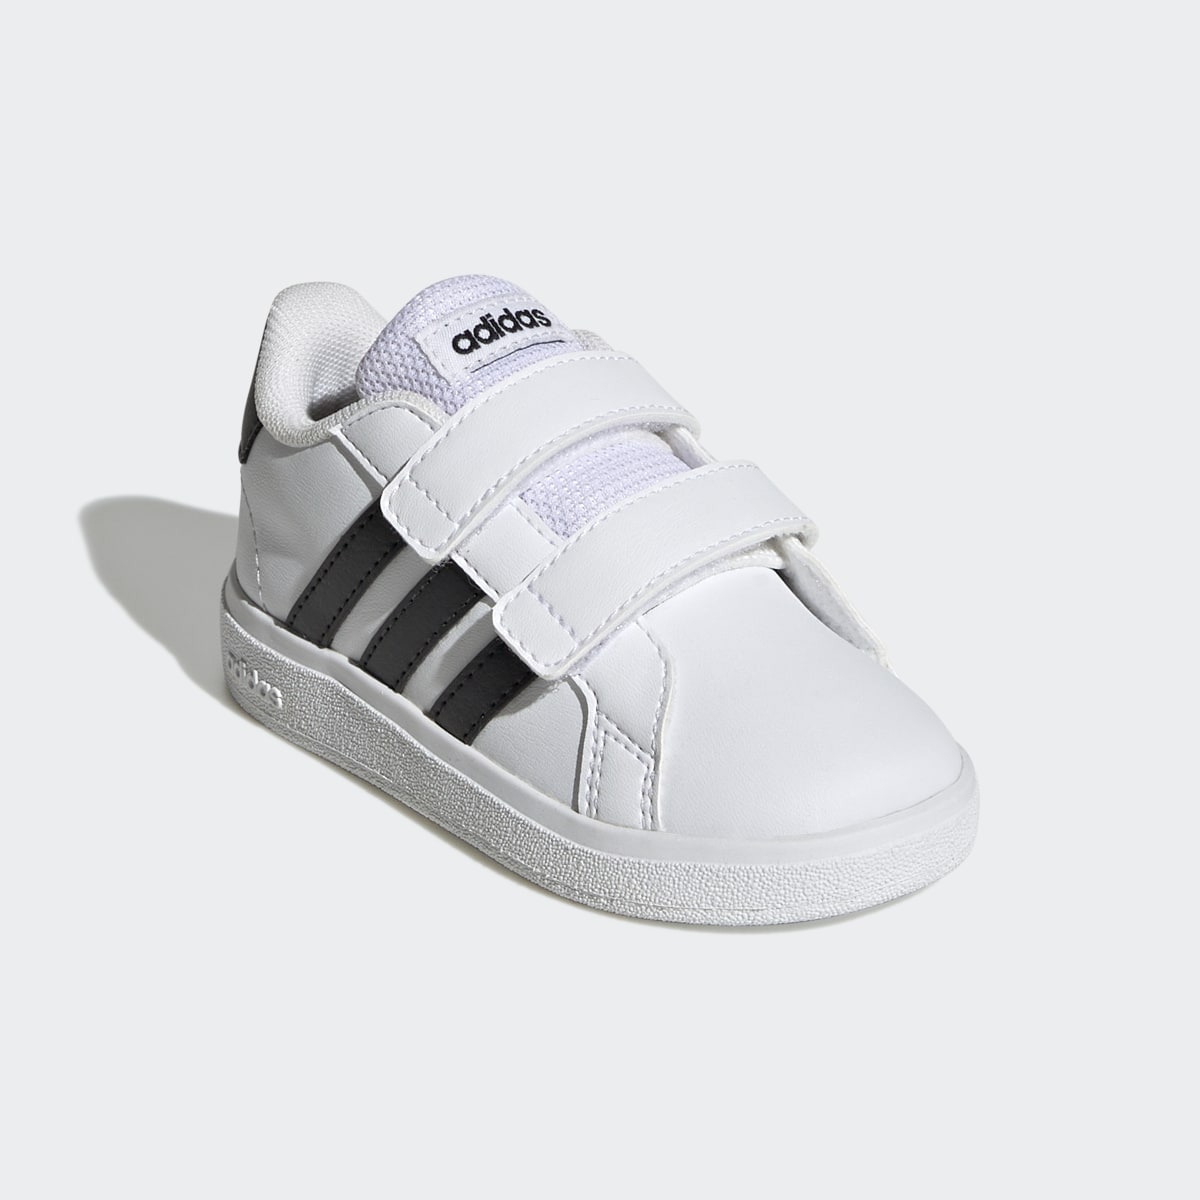 Adidas Grand Court Lifestyle Hook and Loop Shoes. 5